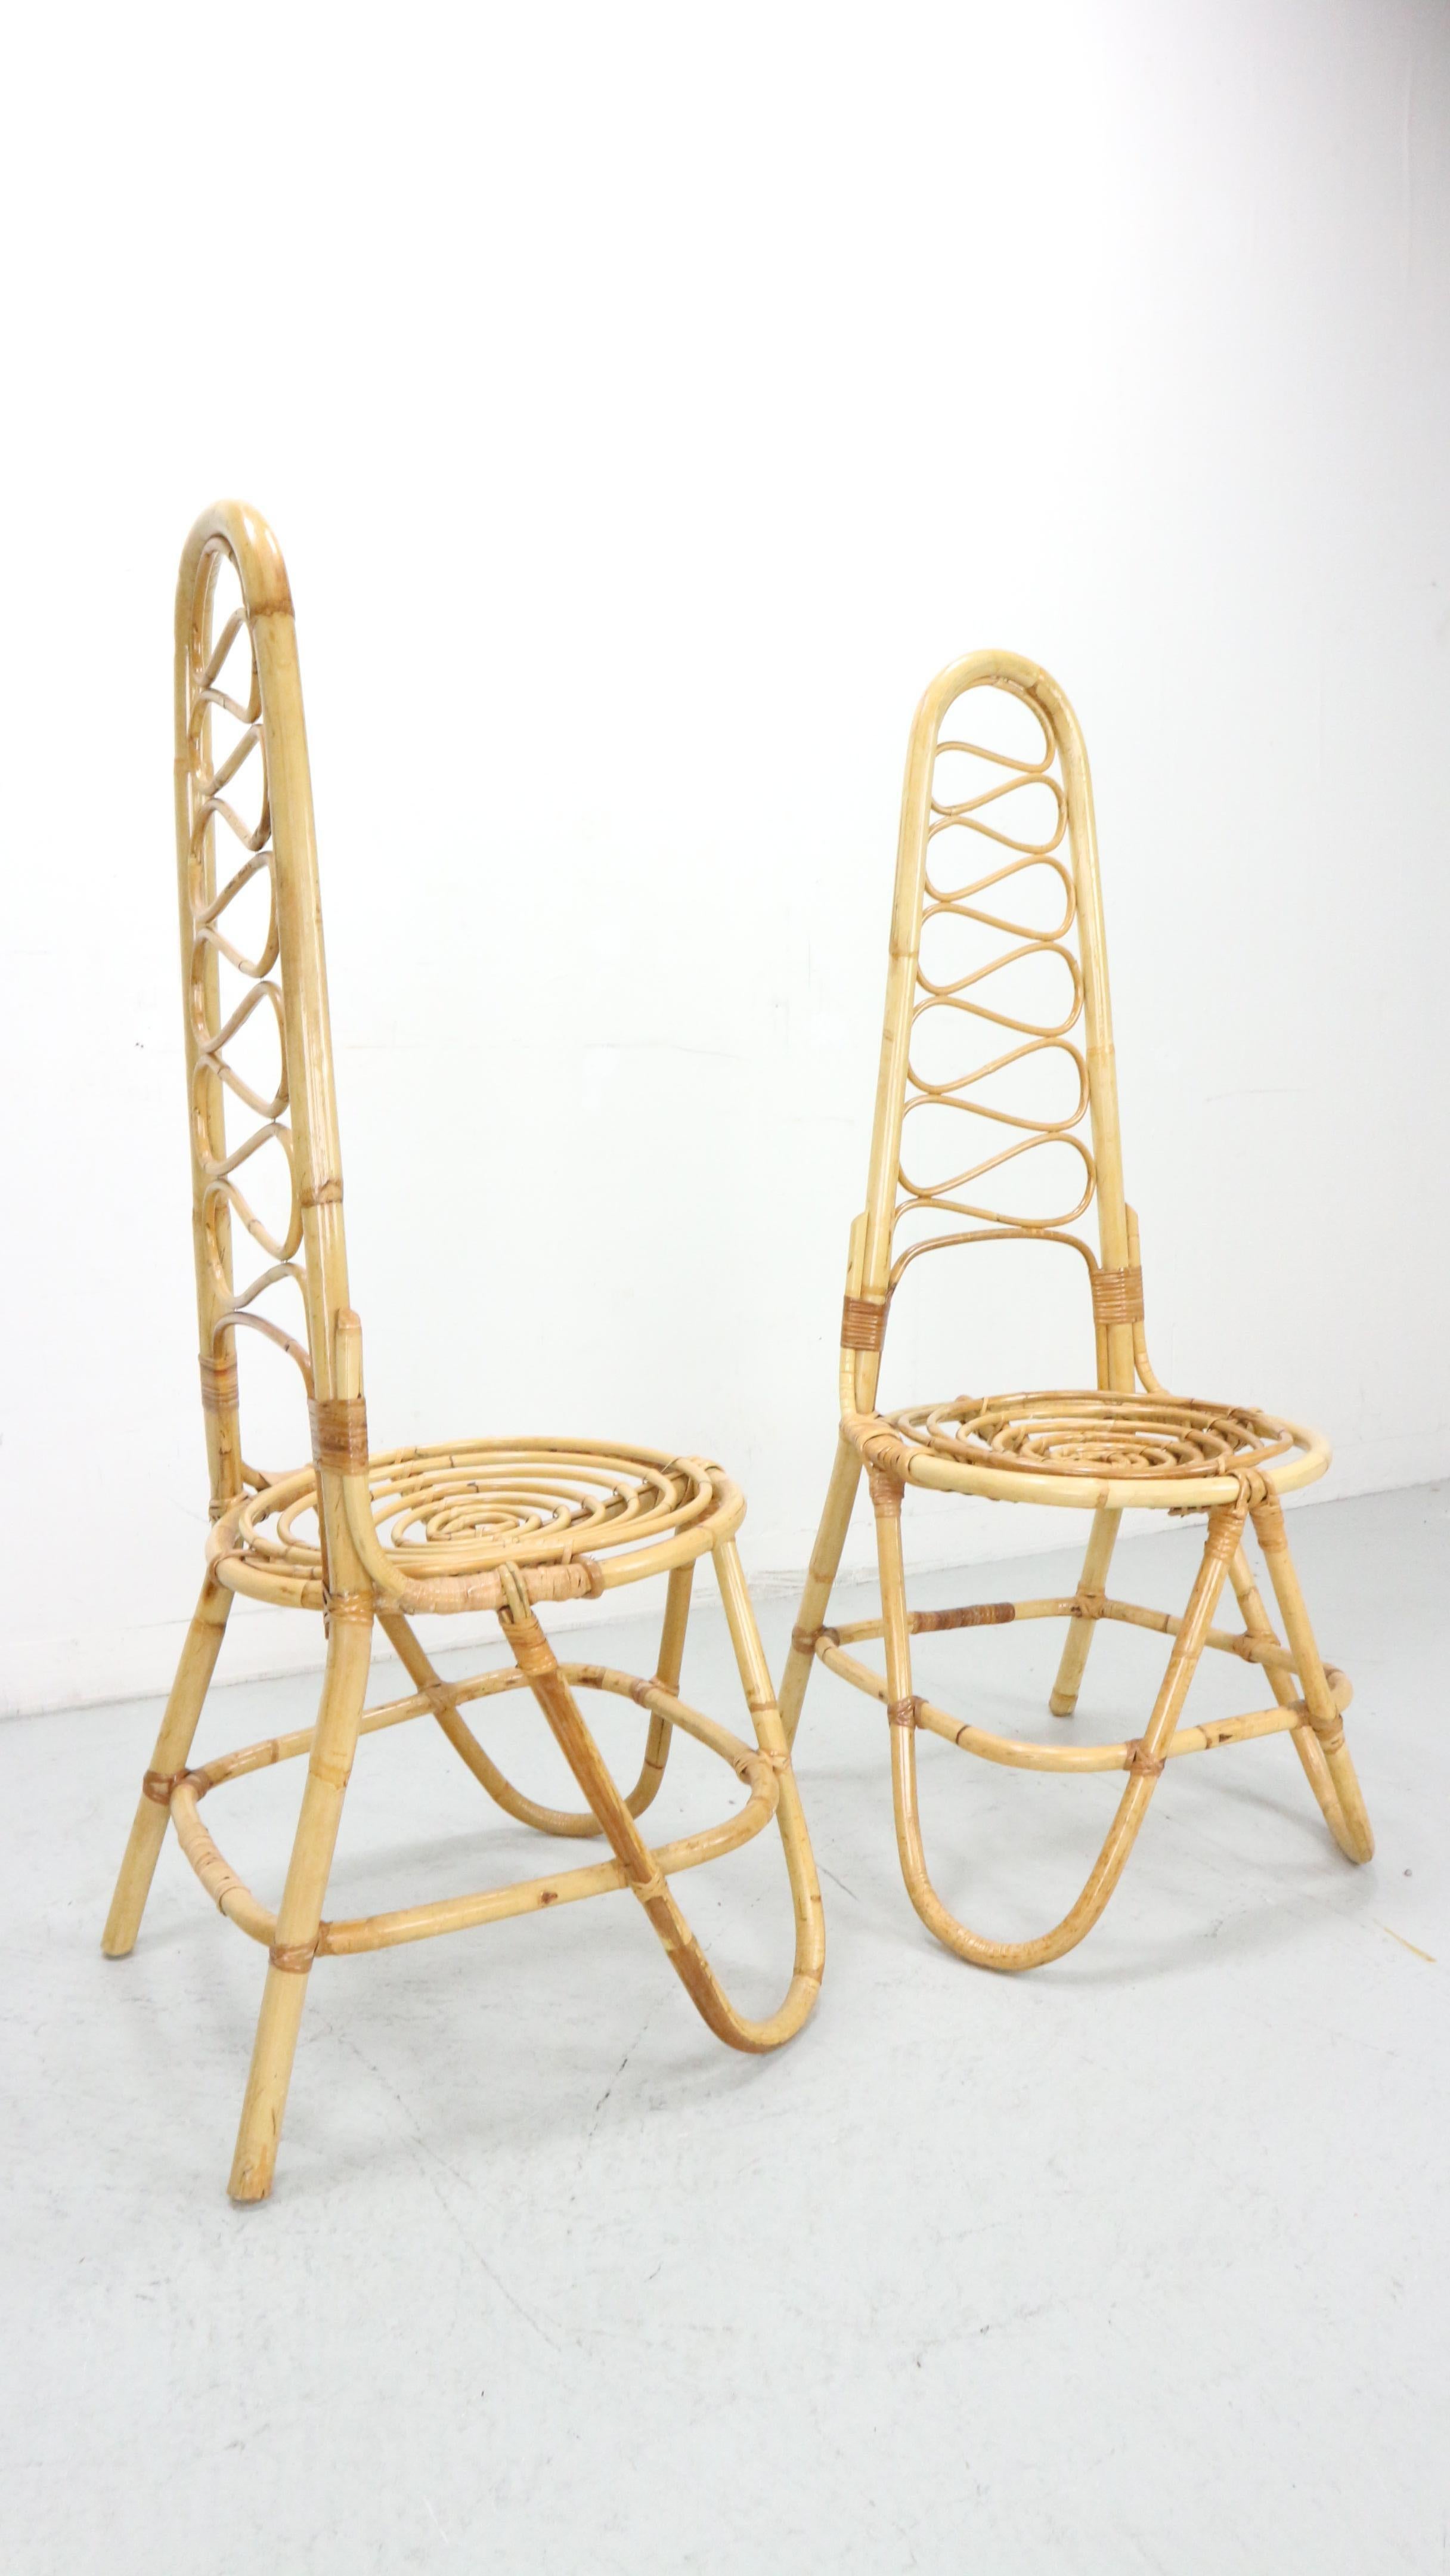 Bamboo Chairs by Dirk Van Sliedrecht for Rohe Noordwolde, 1960 In Good Condition For Sale In The Hague, NL